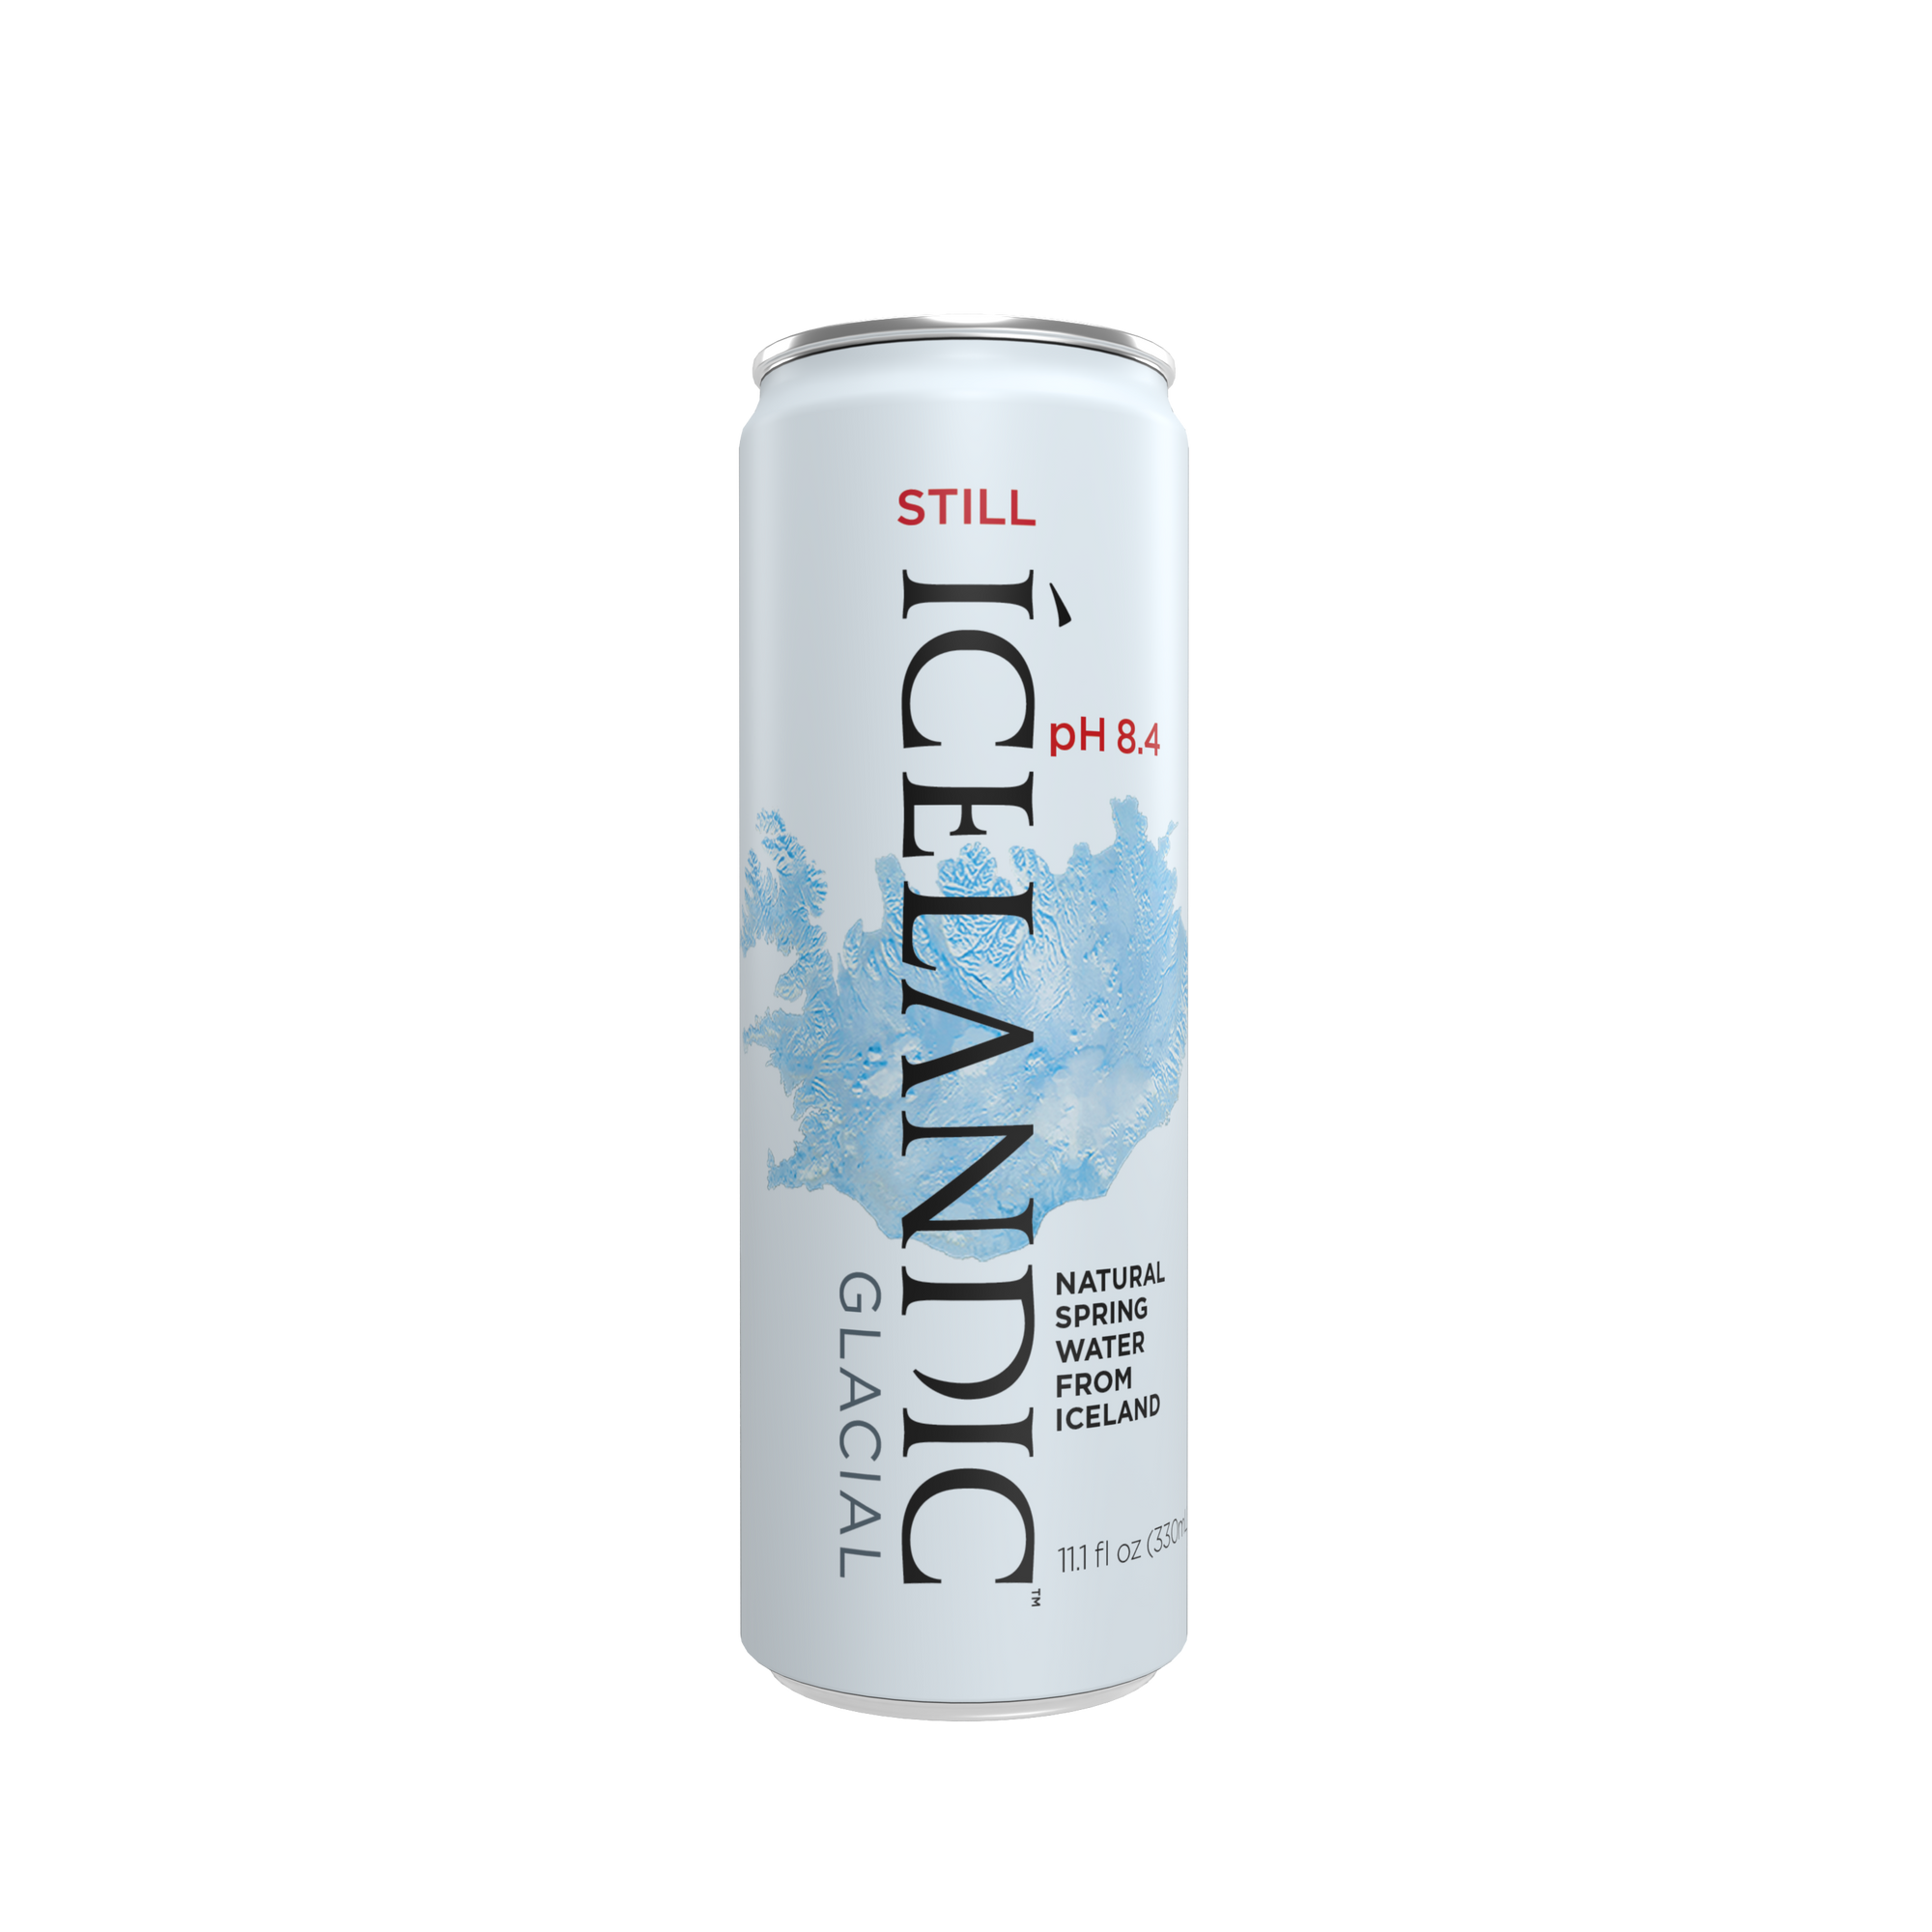 Icelandic Glacial Still Water in Aluminum Cans (30 pack) - Icelandic Glacial